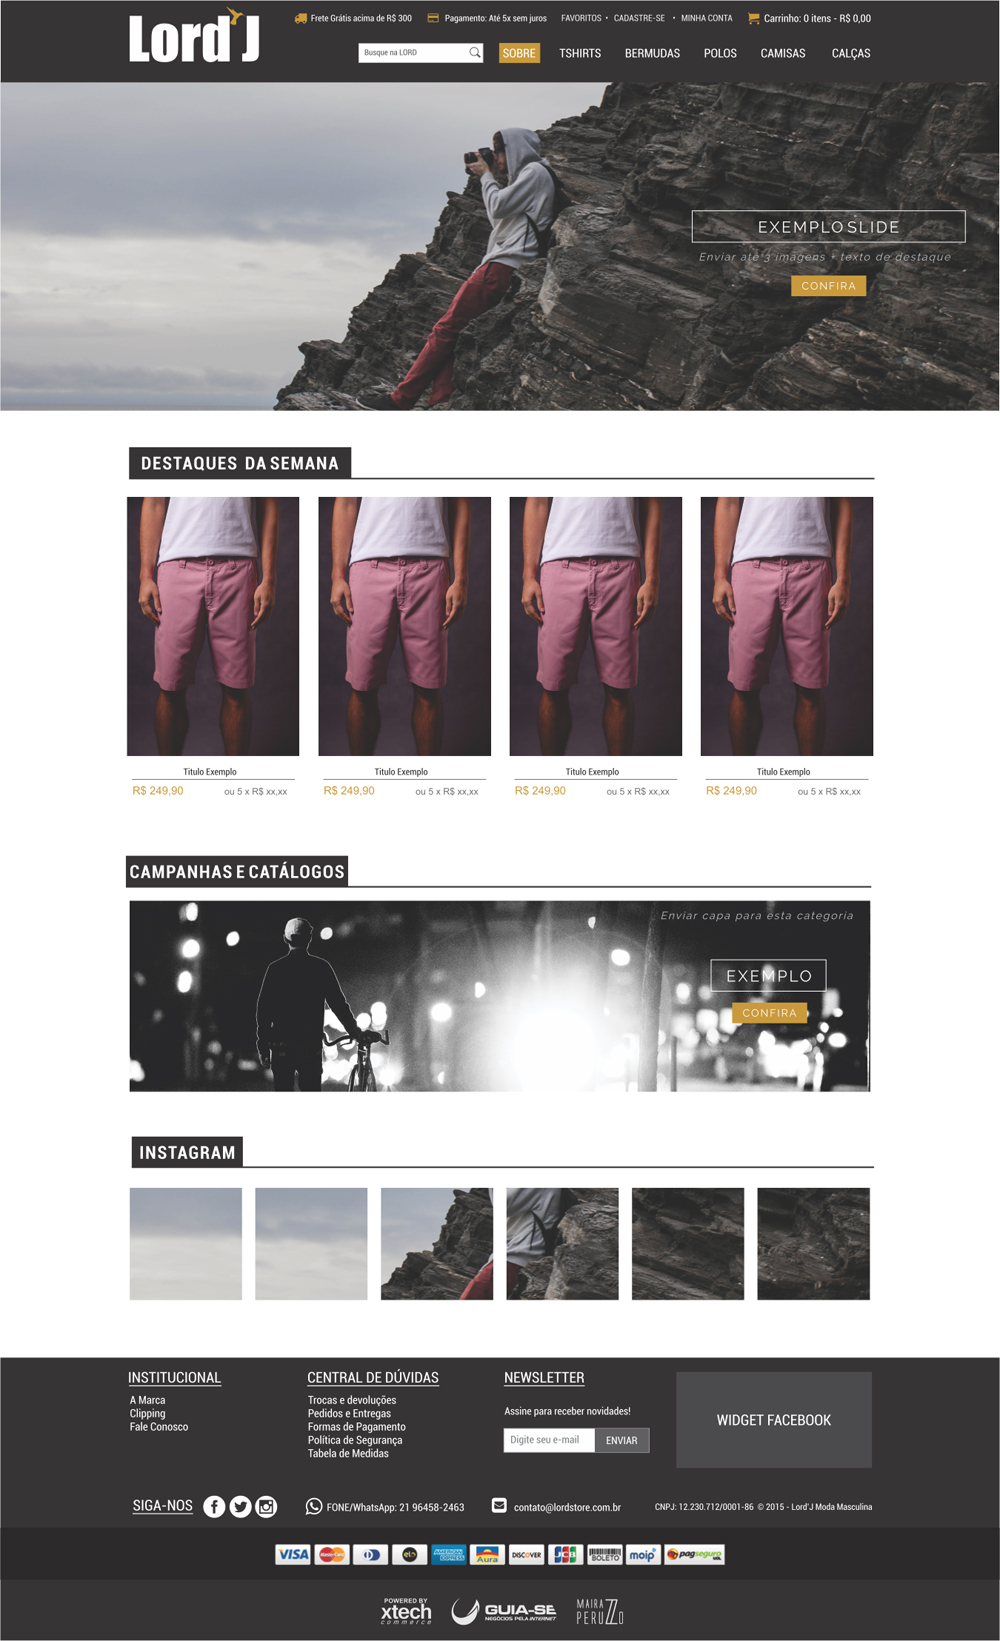 layout para xtechcommerce - lord j home